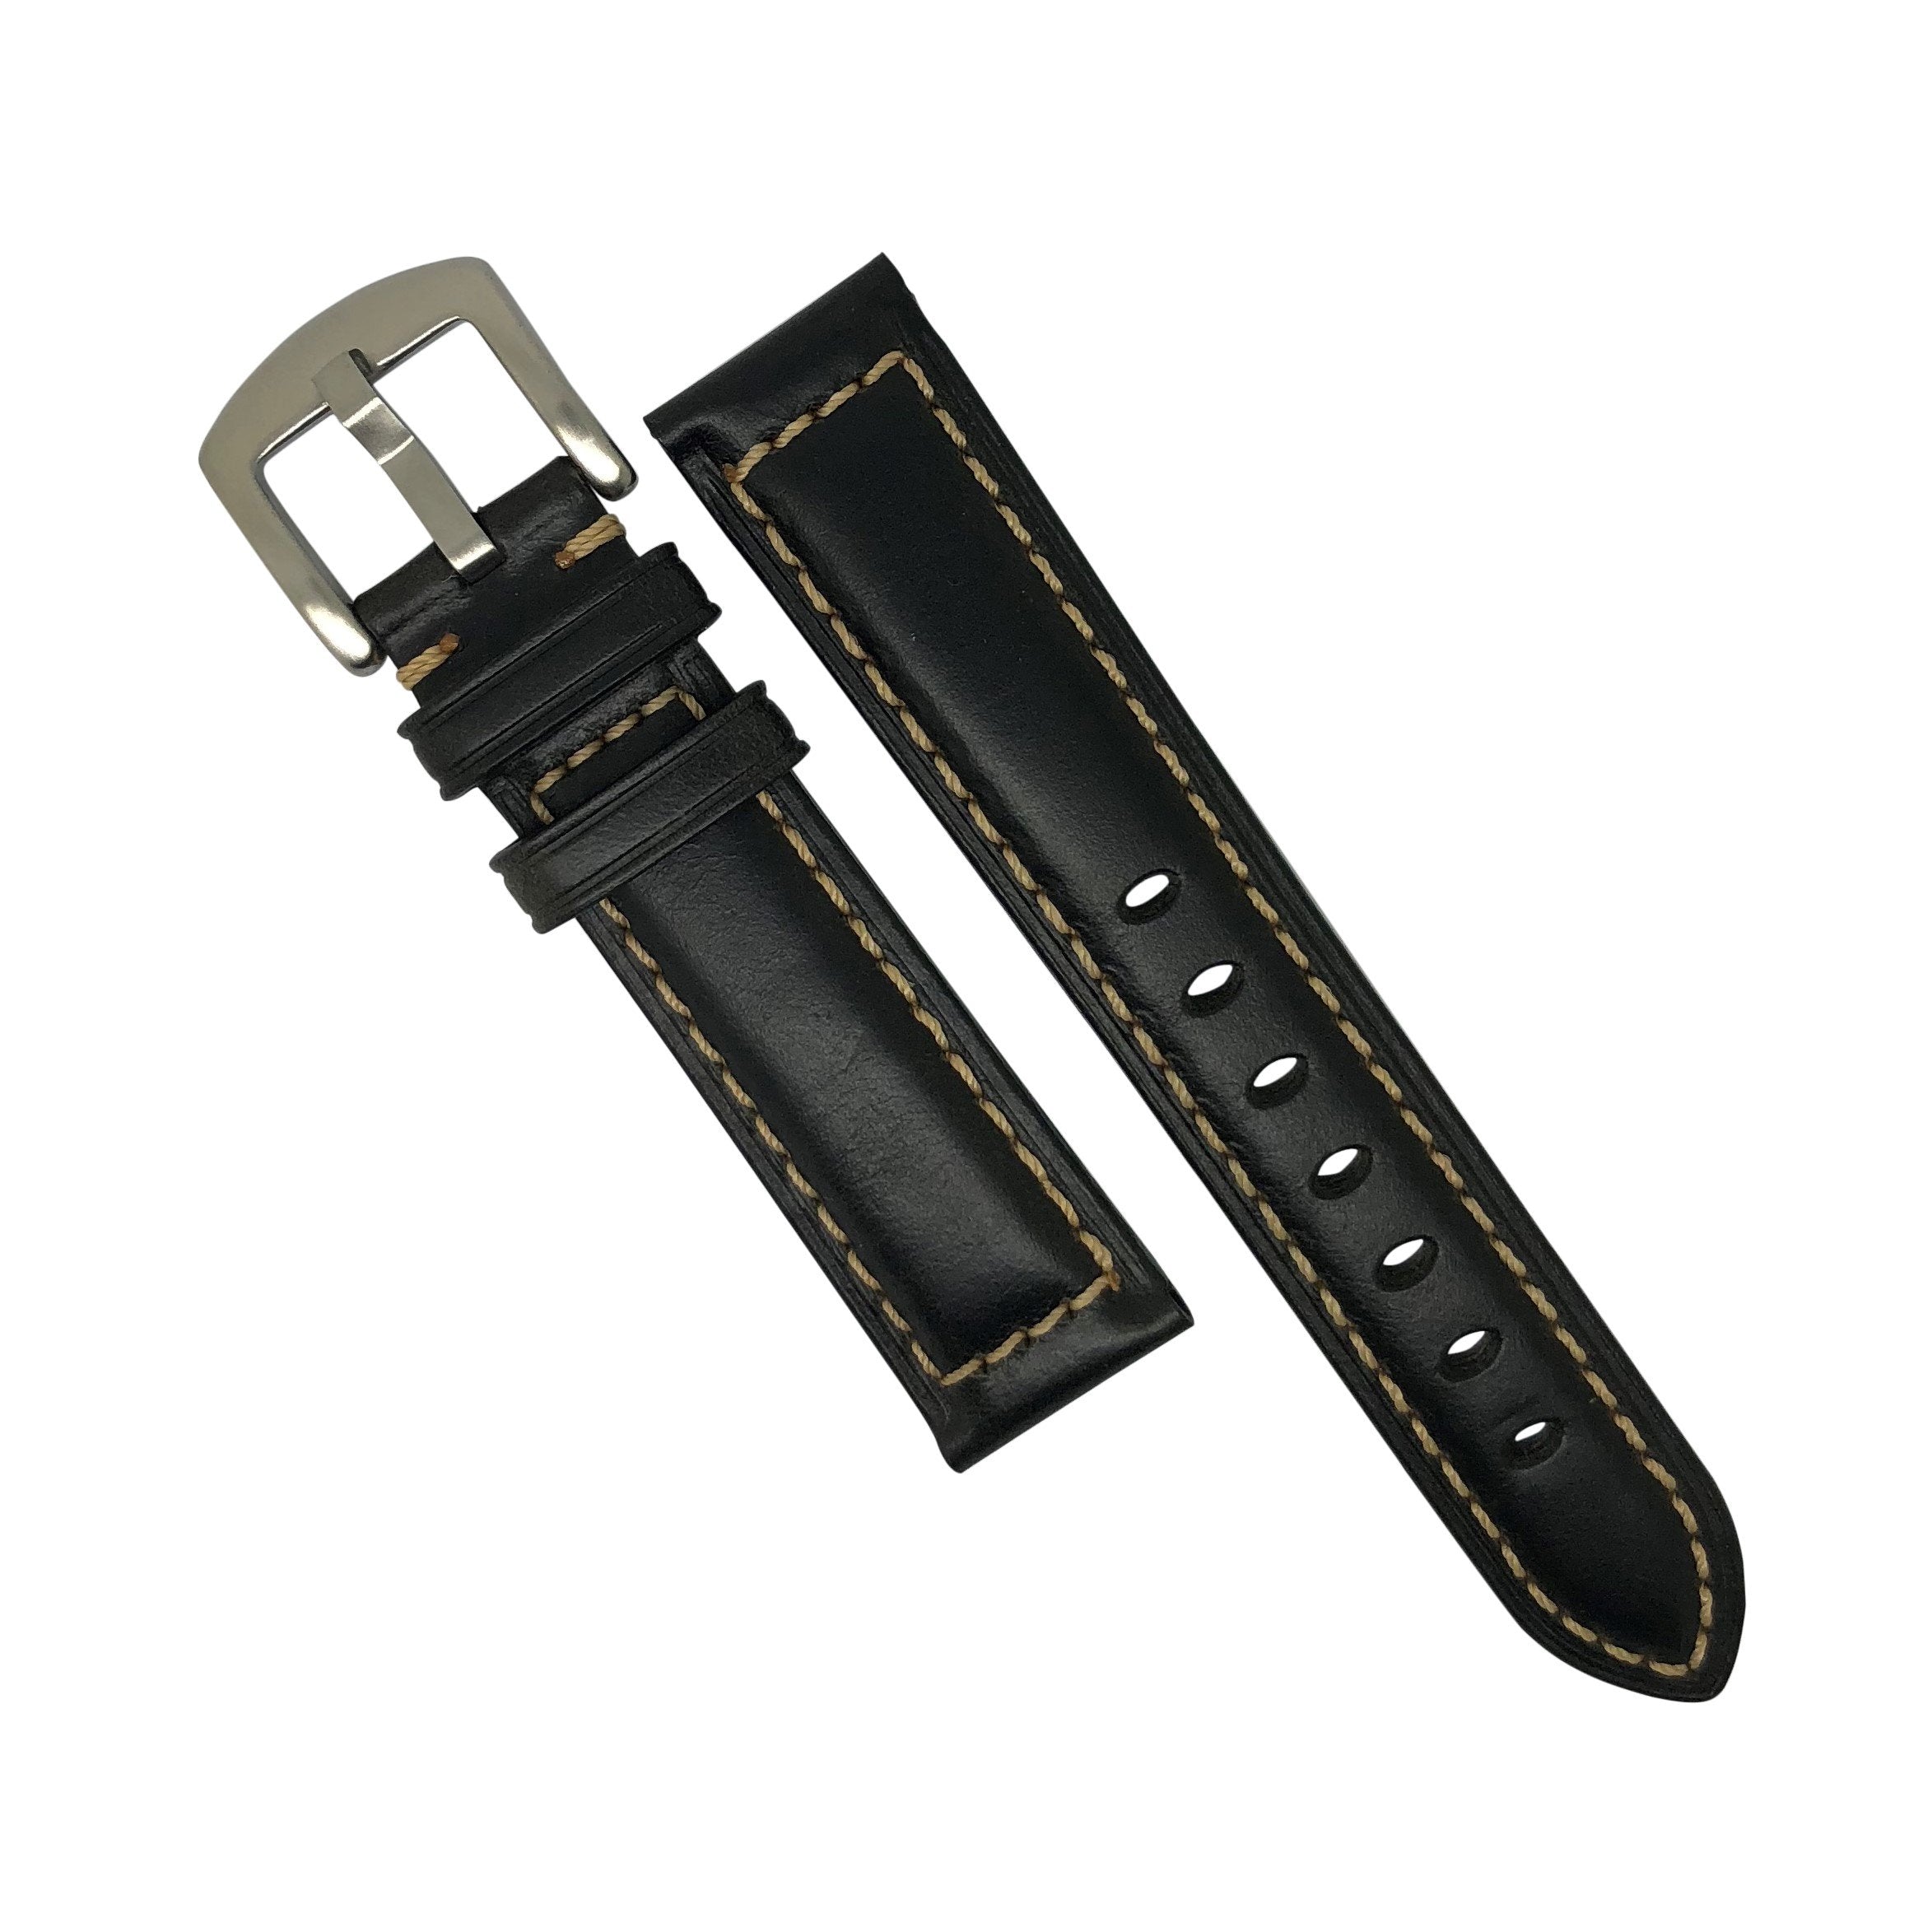 M2 Oil Waxed Leather Watch Strap in Black with Silver Buckle (20mm) - Nomadstore Singapore